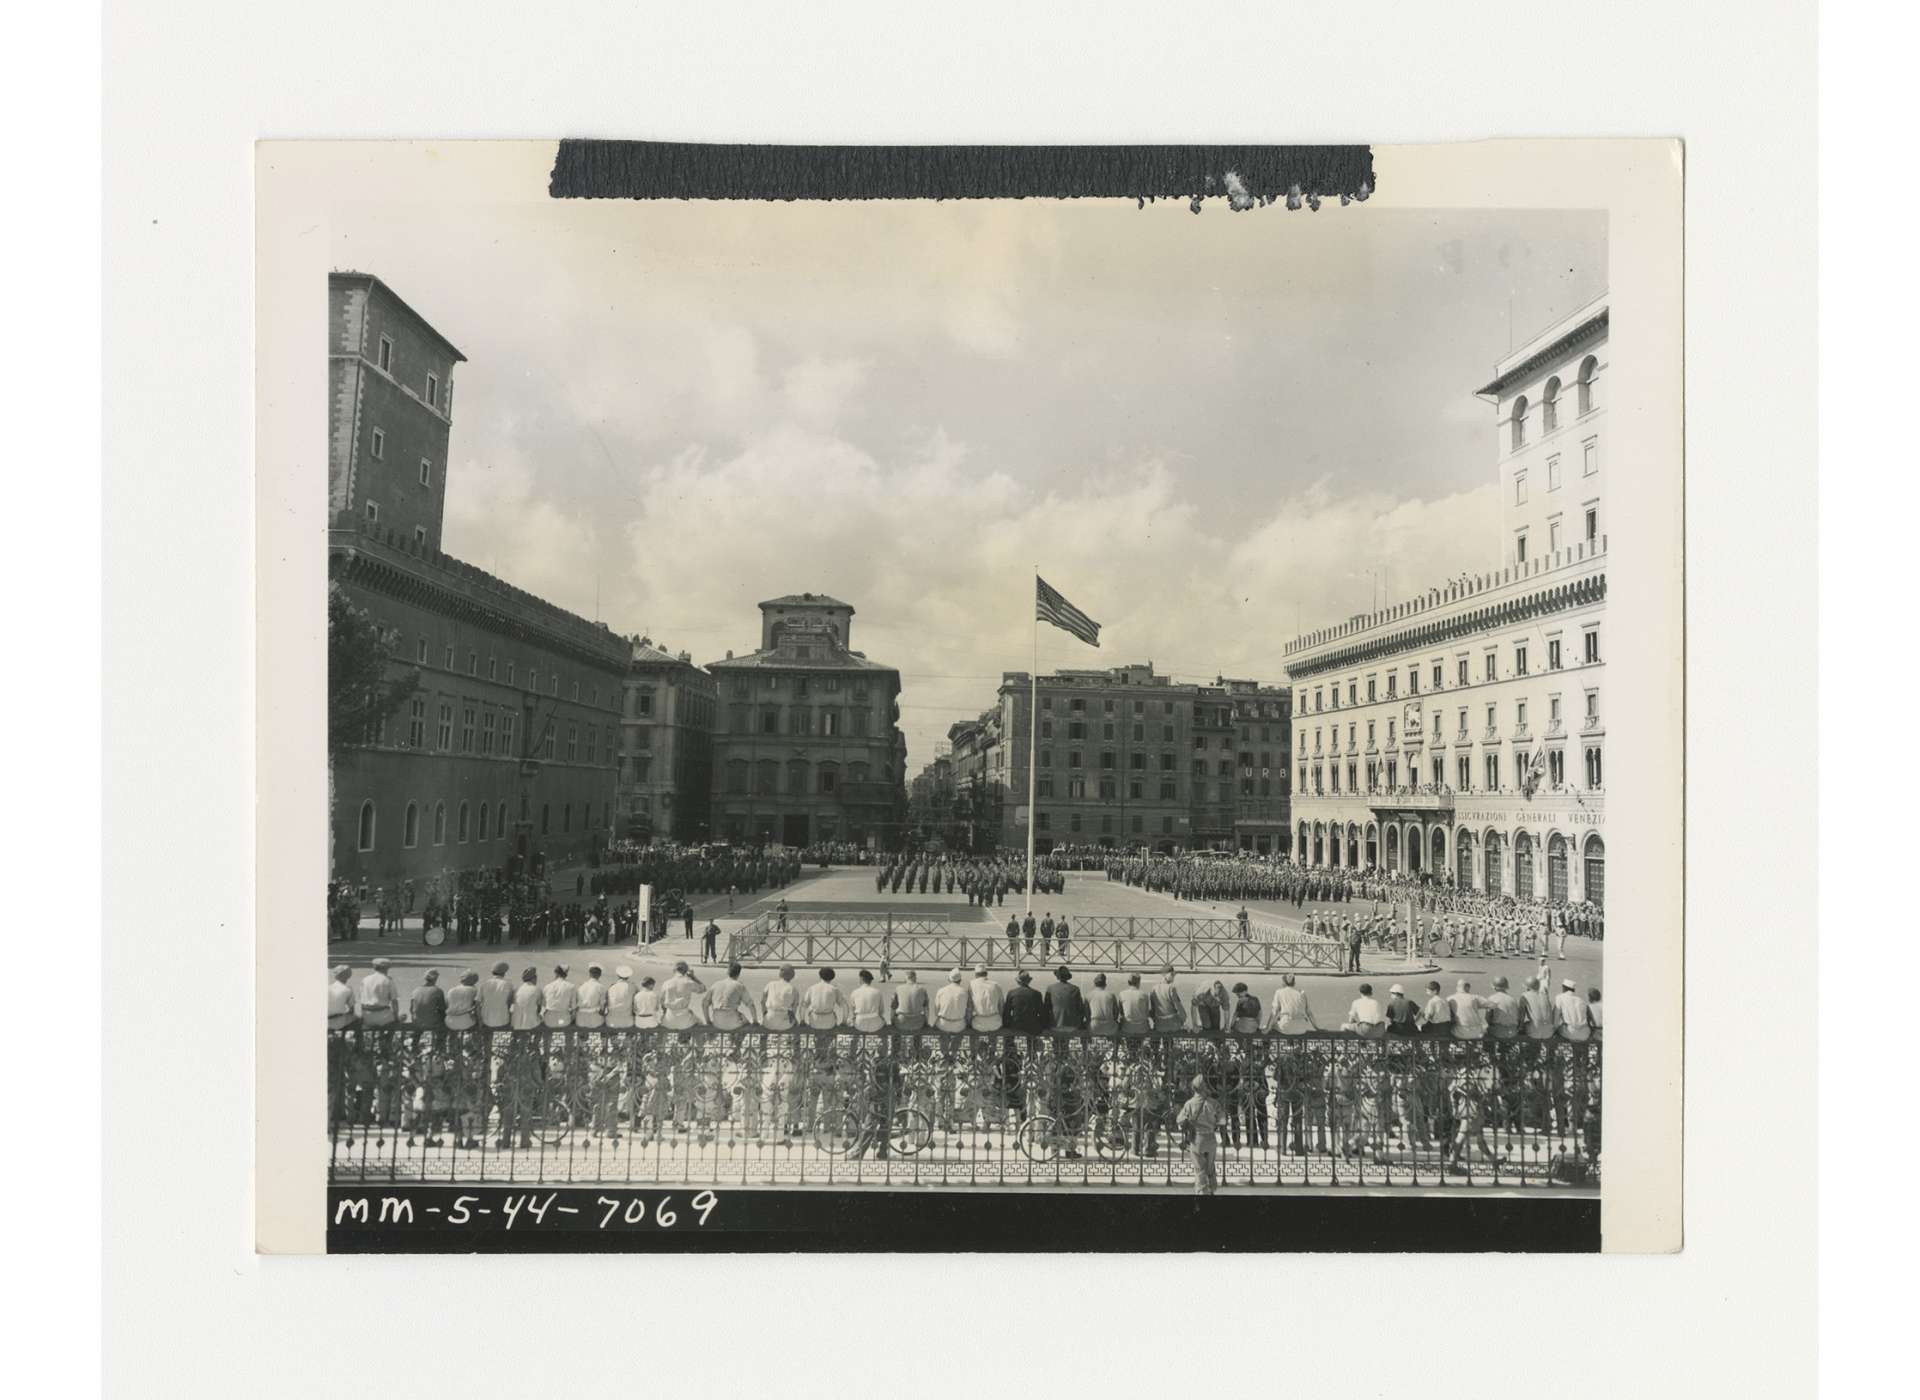 Troops of US 2nd Battalion, 338th Infantry Regiment, 85th Infantry Division, gather in the Piazza Venezia in Rome for an Independence Day retreat ceremony to lower the American flag flying over Rome. The flag had flown over the White House on December 7, 1941. US Army Signal Corps photo, gift of Ms. Regan Forrester, from the Collection of The National WWII Museum, 2002.337.658.